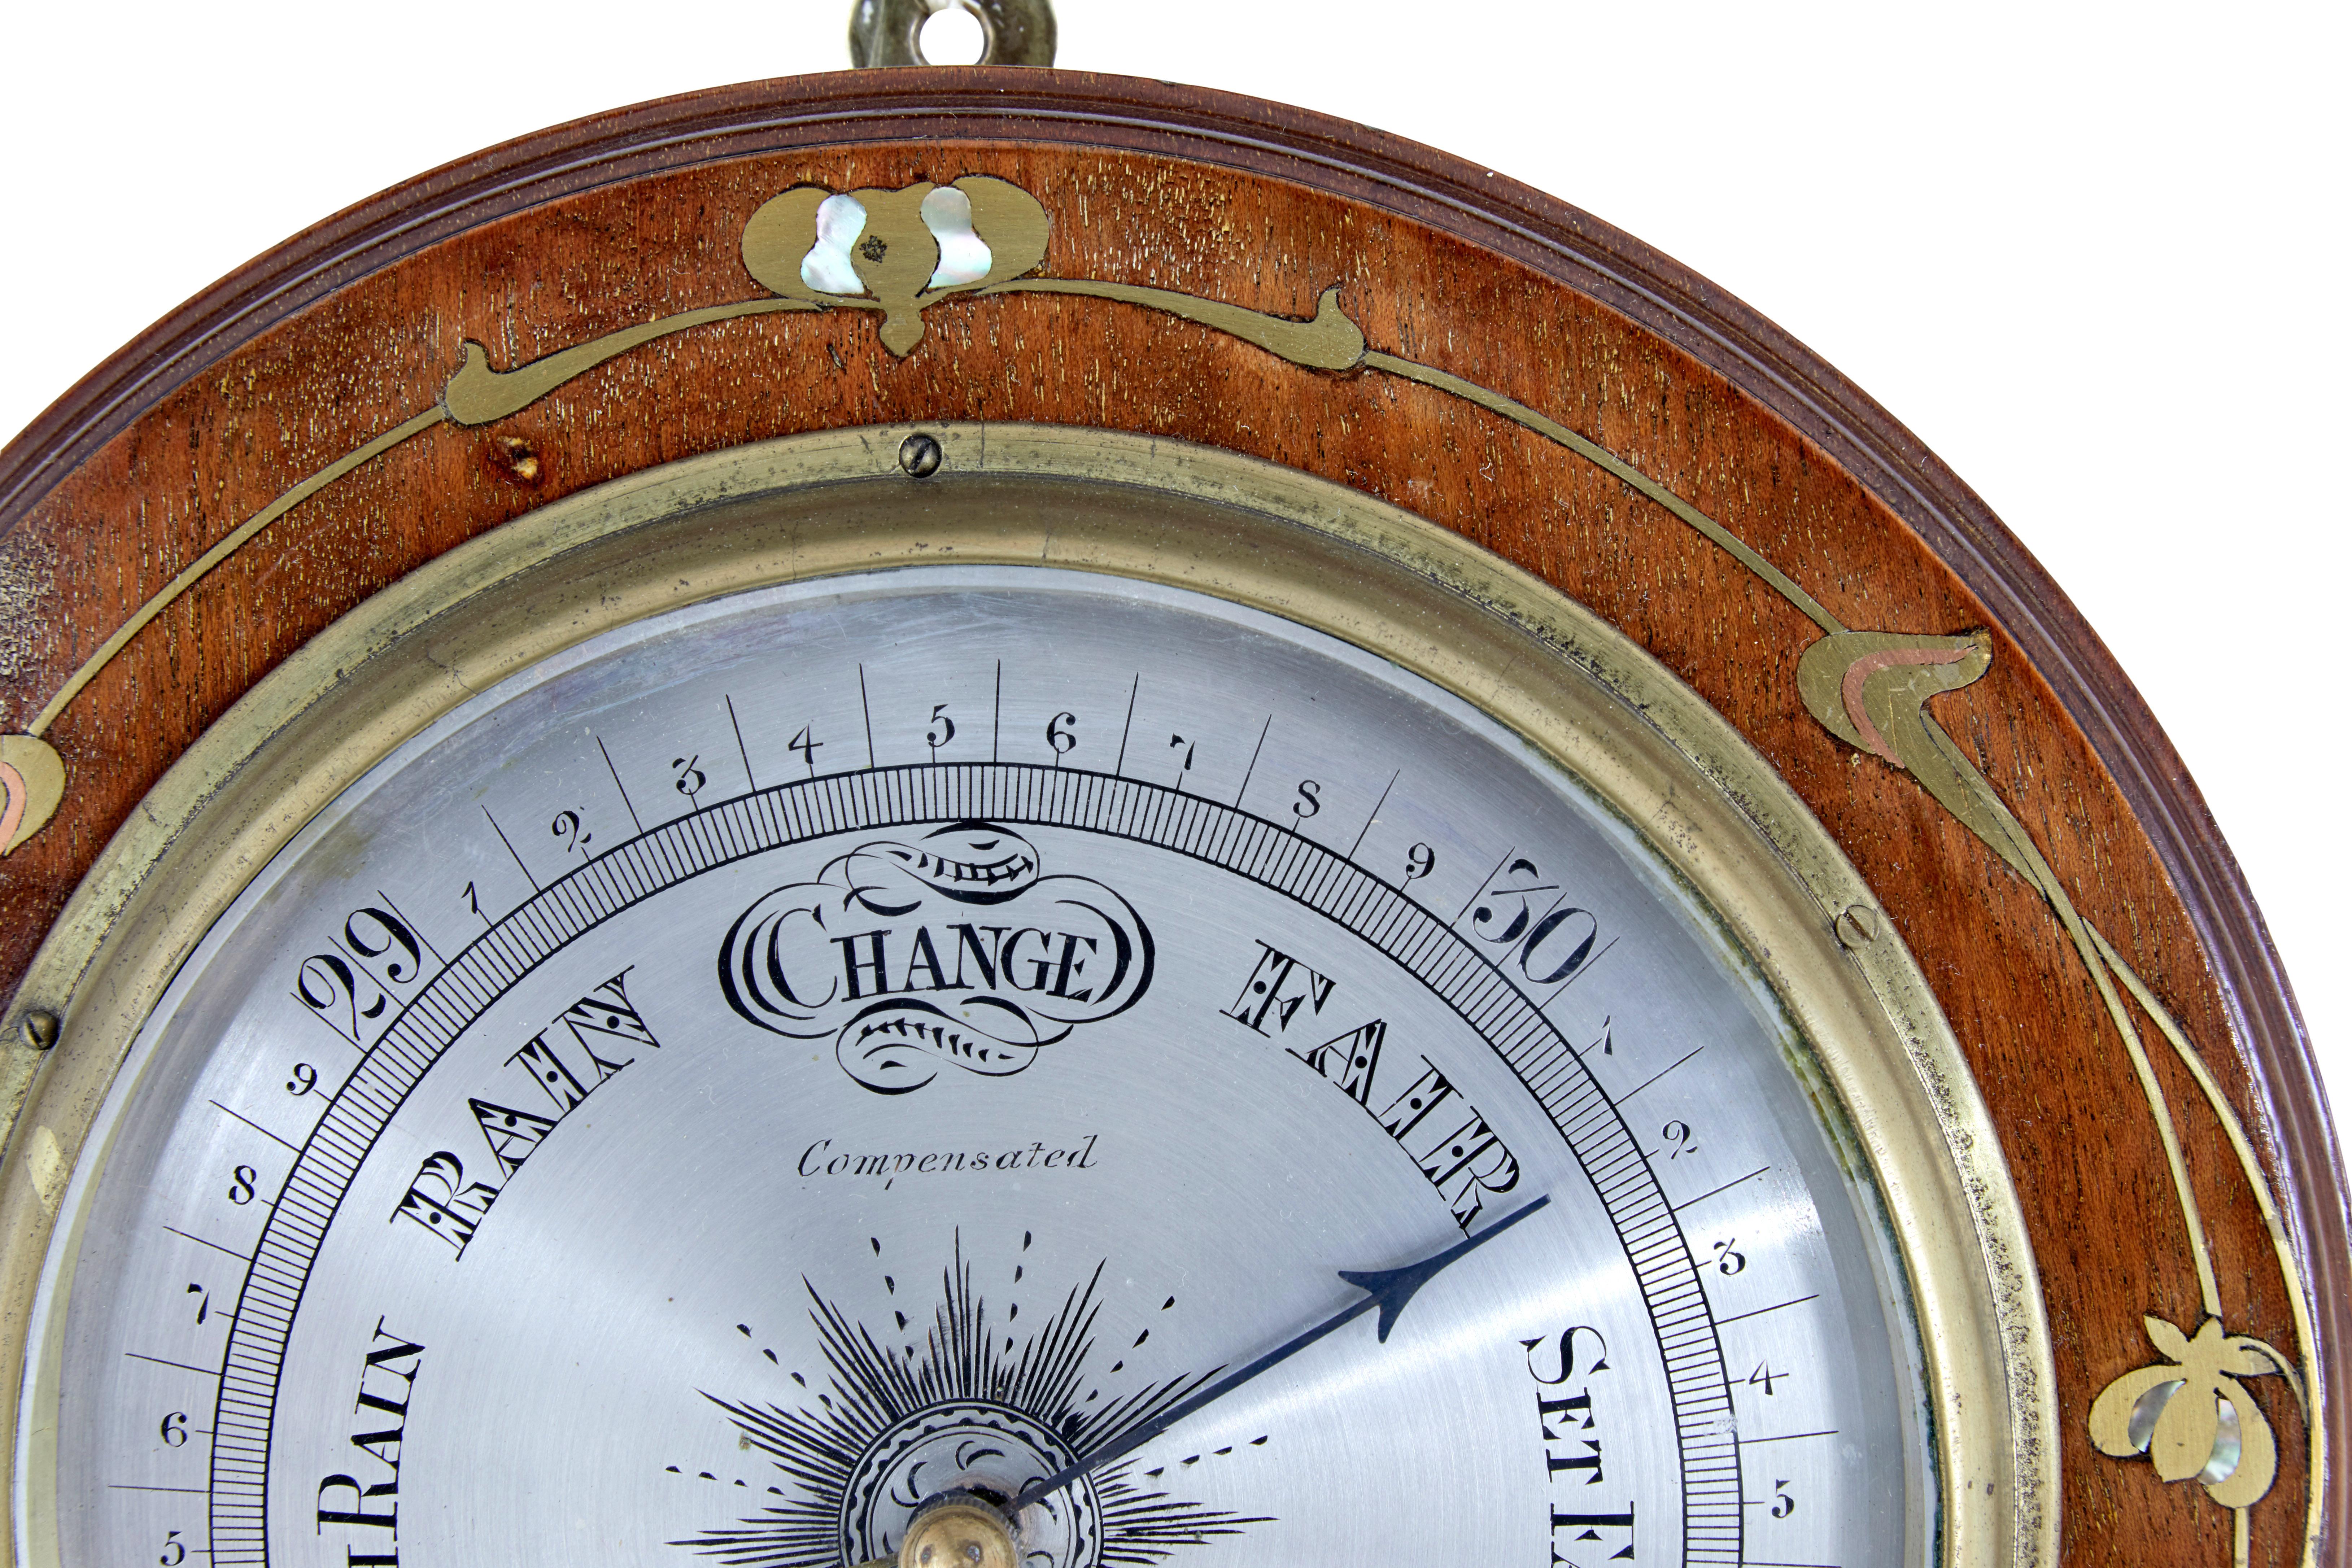 Late 19th century art nouveau barometer circa 1890.

Unusual aneroid barometer, which means it doesn't contain liquid and measures pressure changes by using air to expand its components.

Circular shape, inlaid with brass and mother of pearl. 